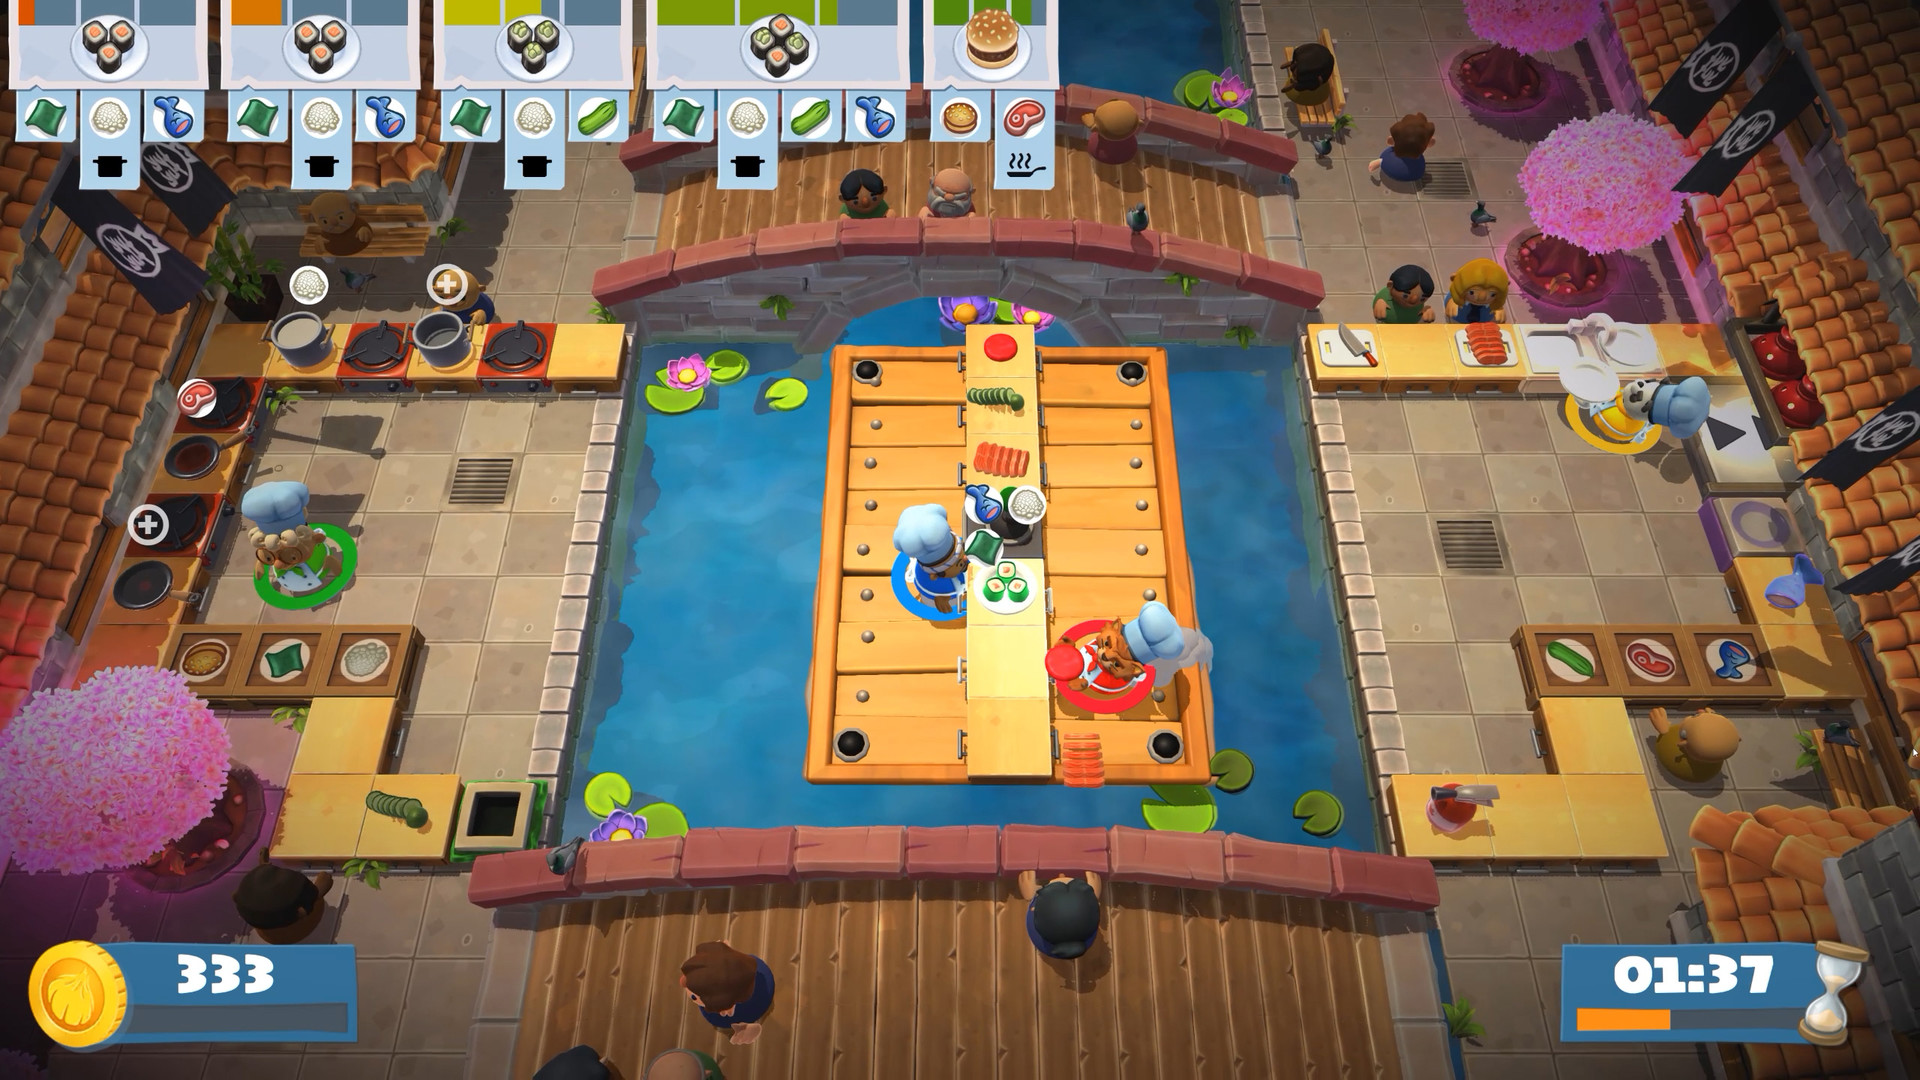 Overcooked! 2 on Steam